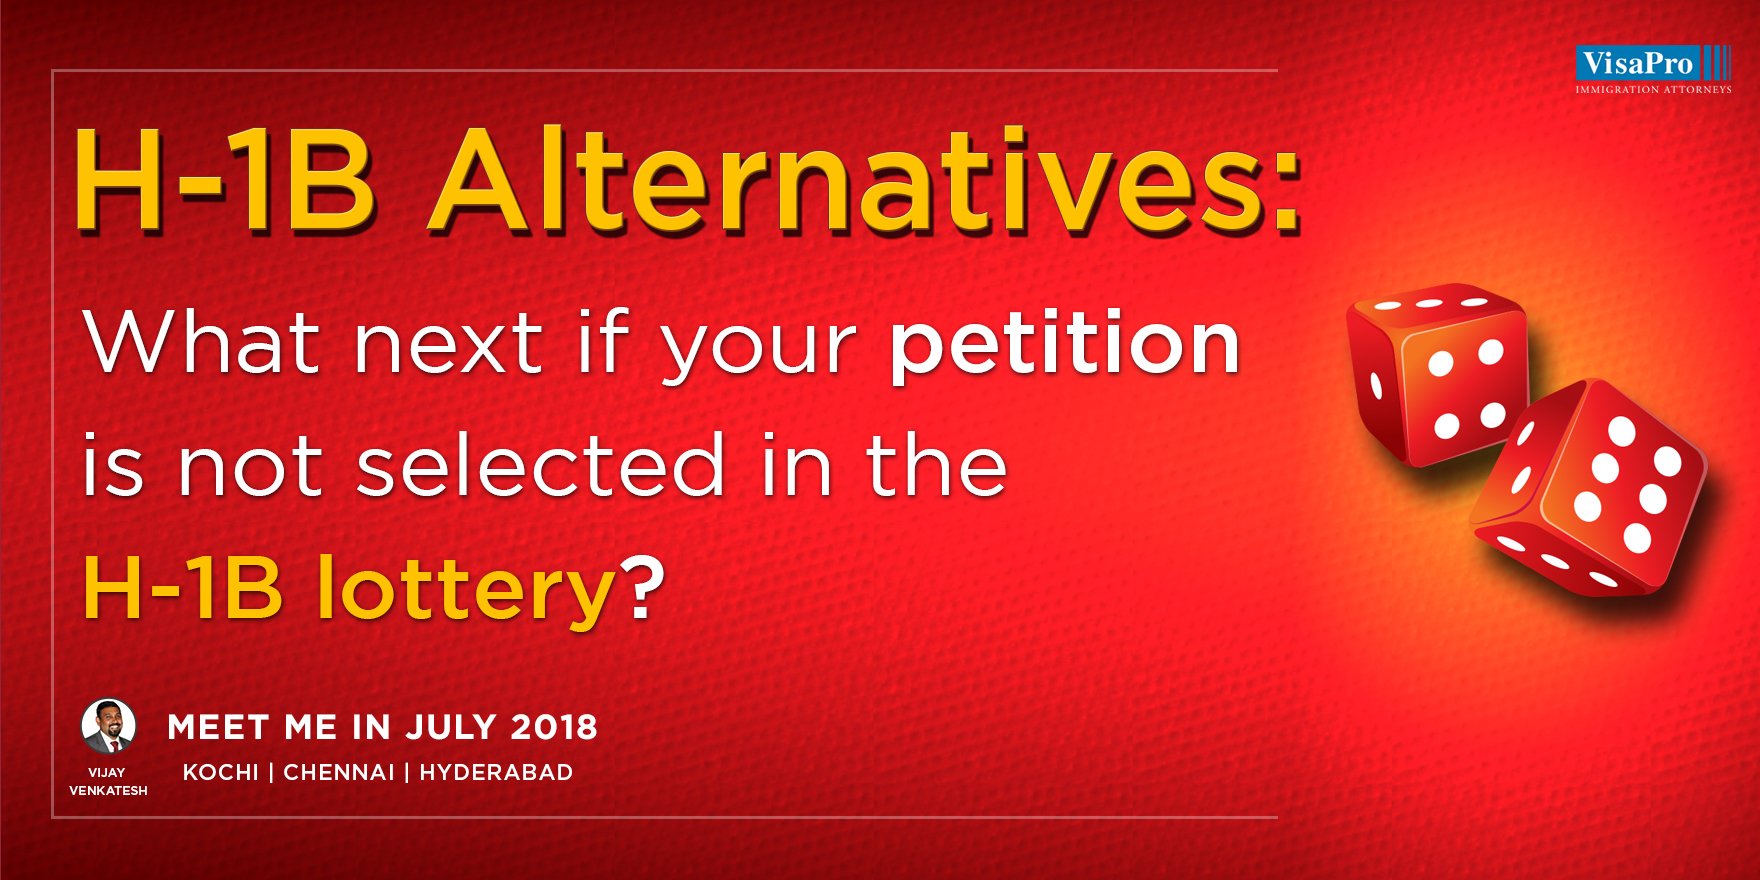 H-1B Alternatives: What Next If Your Petition Is Not Selected In The H-1B Lottery?, Chennai, Tamil Nadu, India